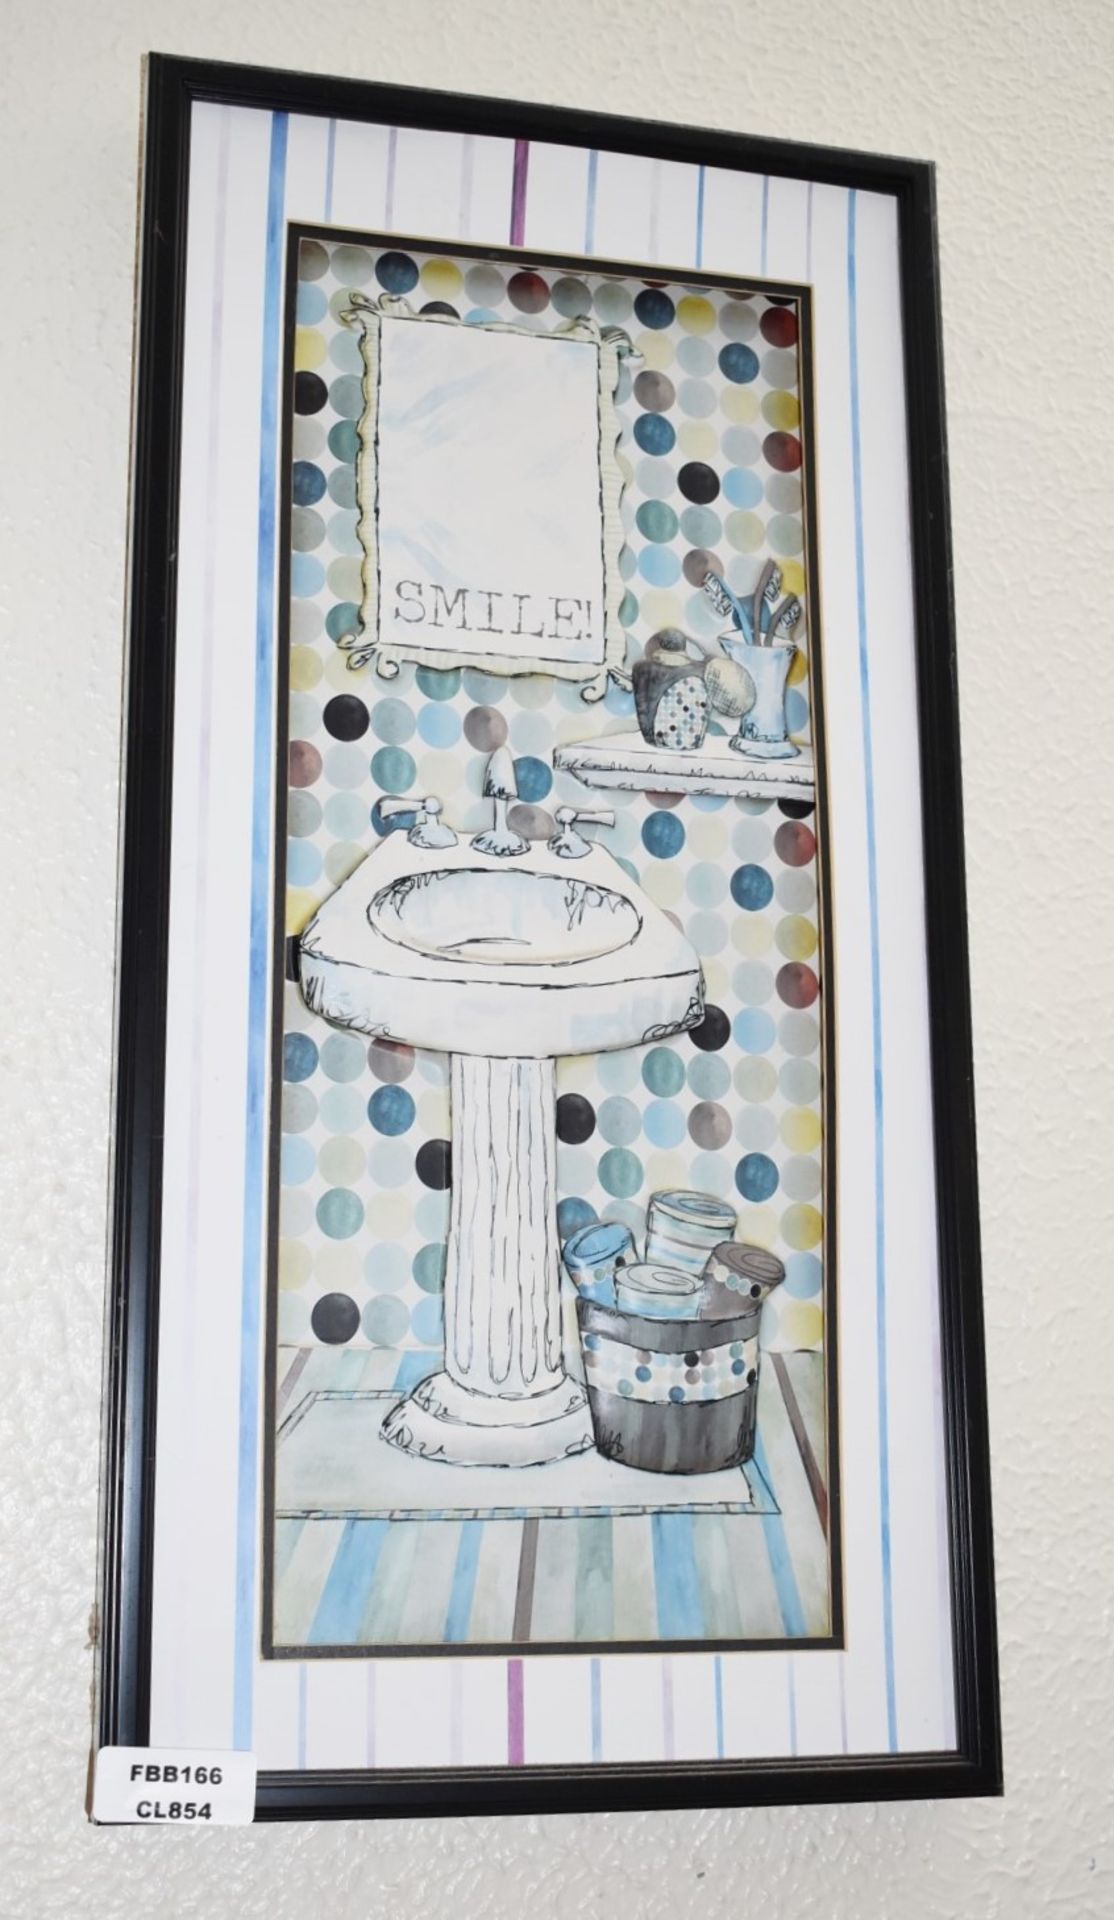 1 x Framed Wall Picture Depicting a Bathroom - 61 x 31 cms